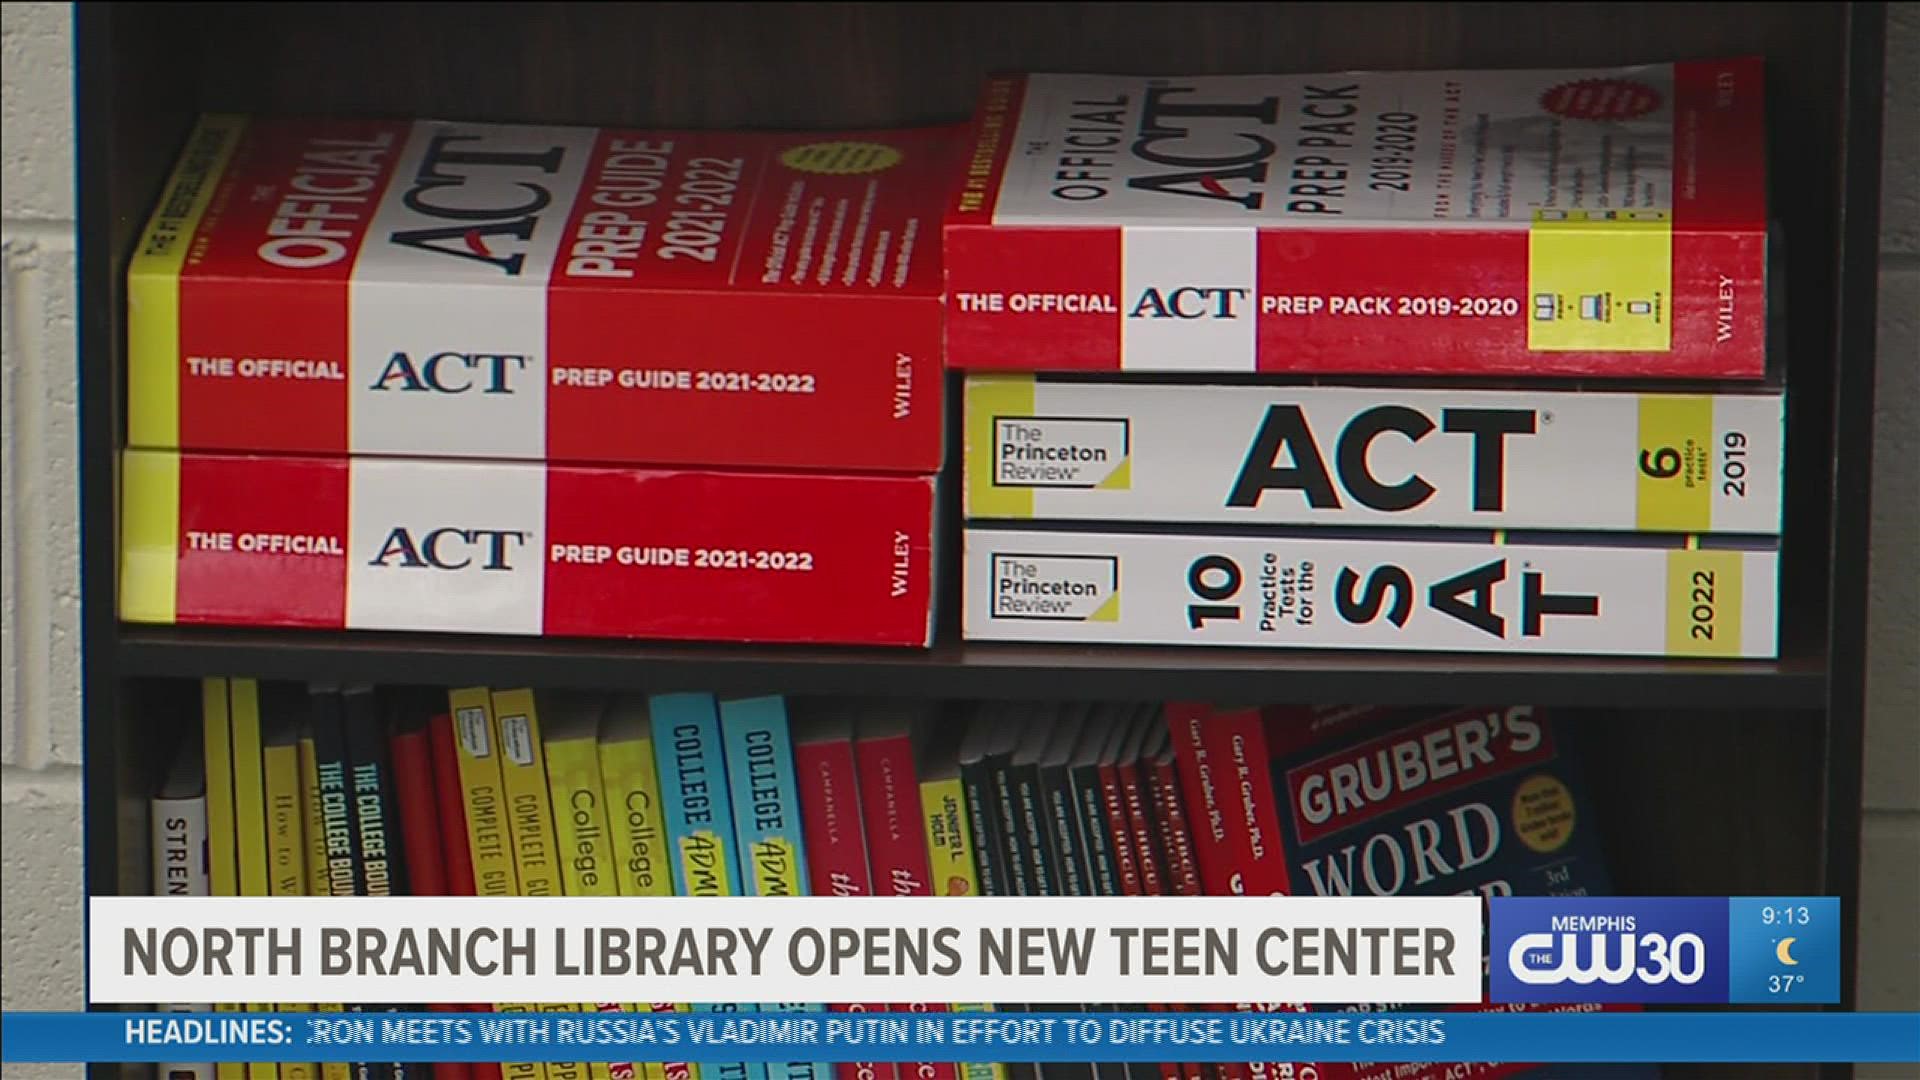 The library, which serves the North Memphis community, said the new Teen Innovation Center will help make an impact on the community's youth.